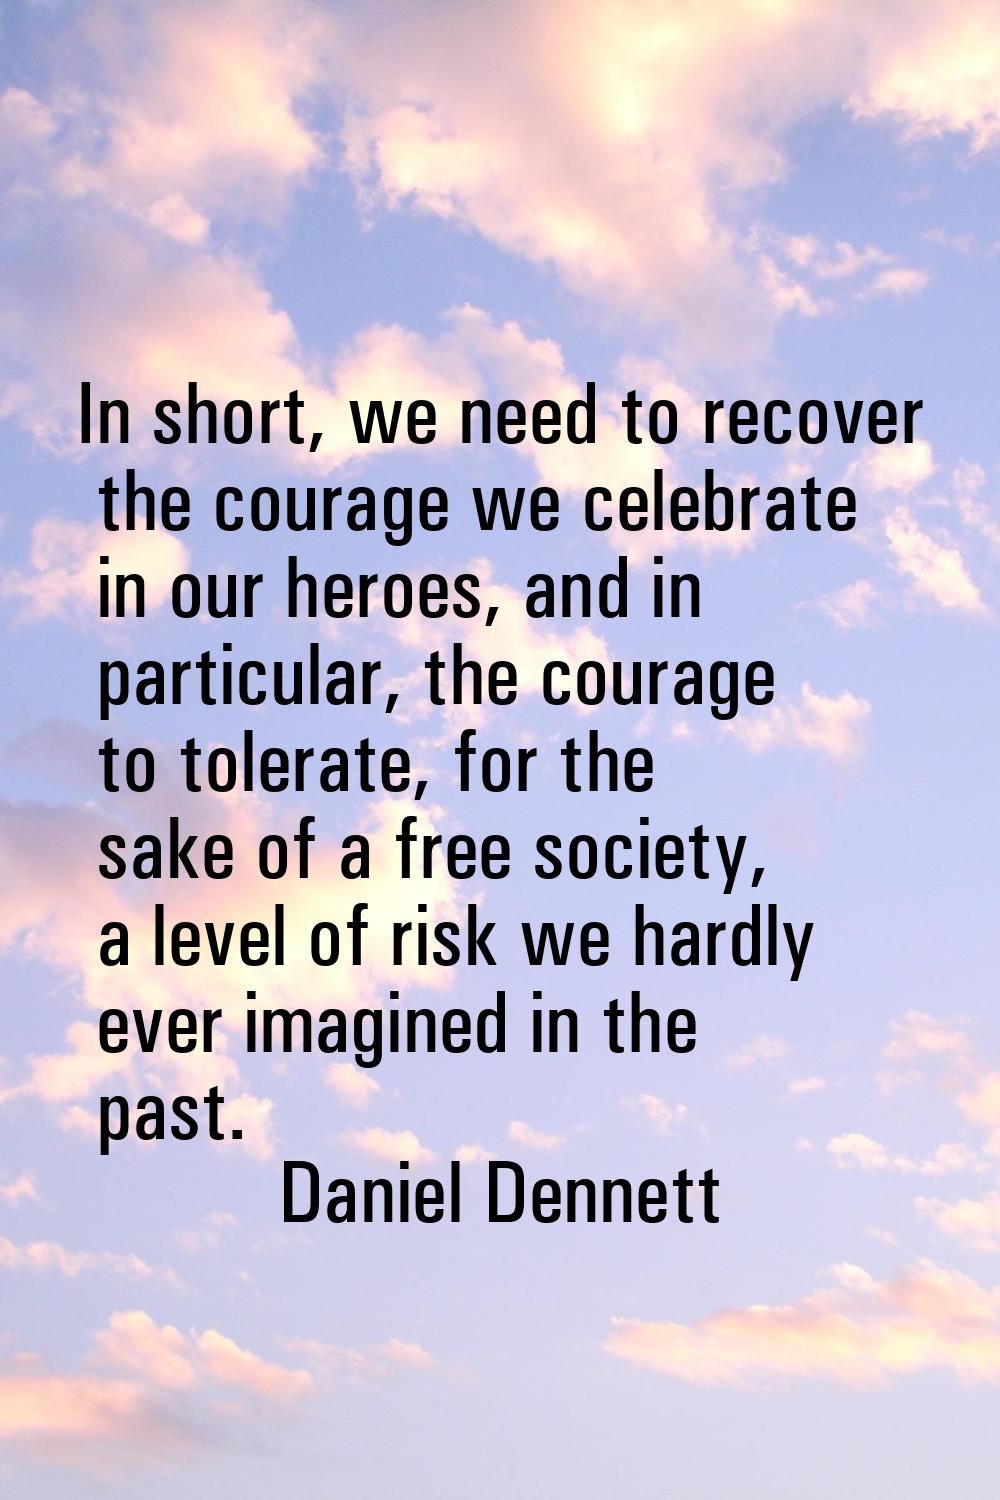 In short, we need to recover the courage we celebrate in our heroes, and in particular, the courage